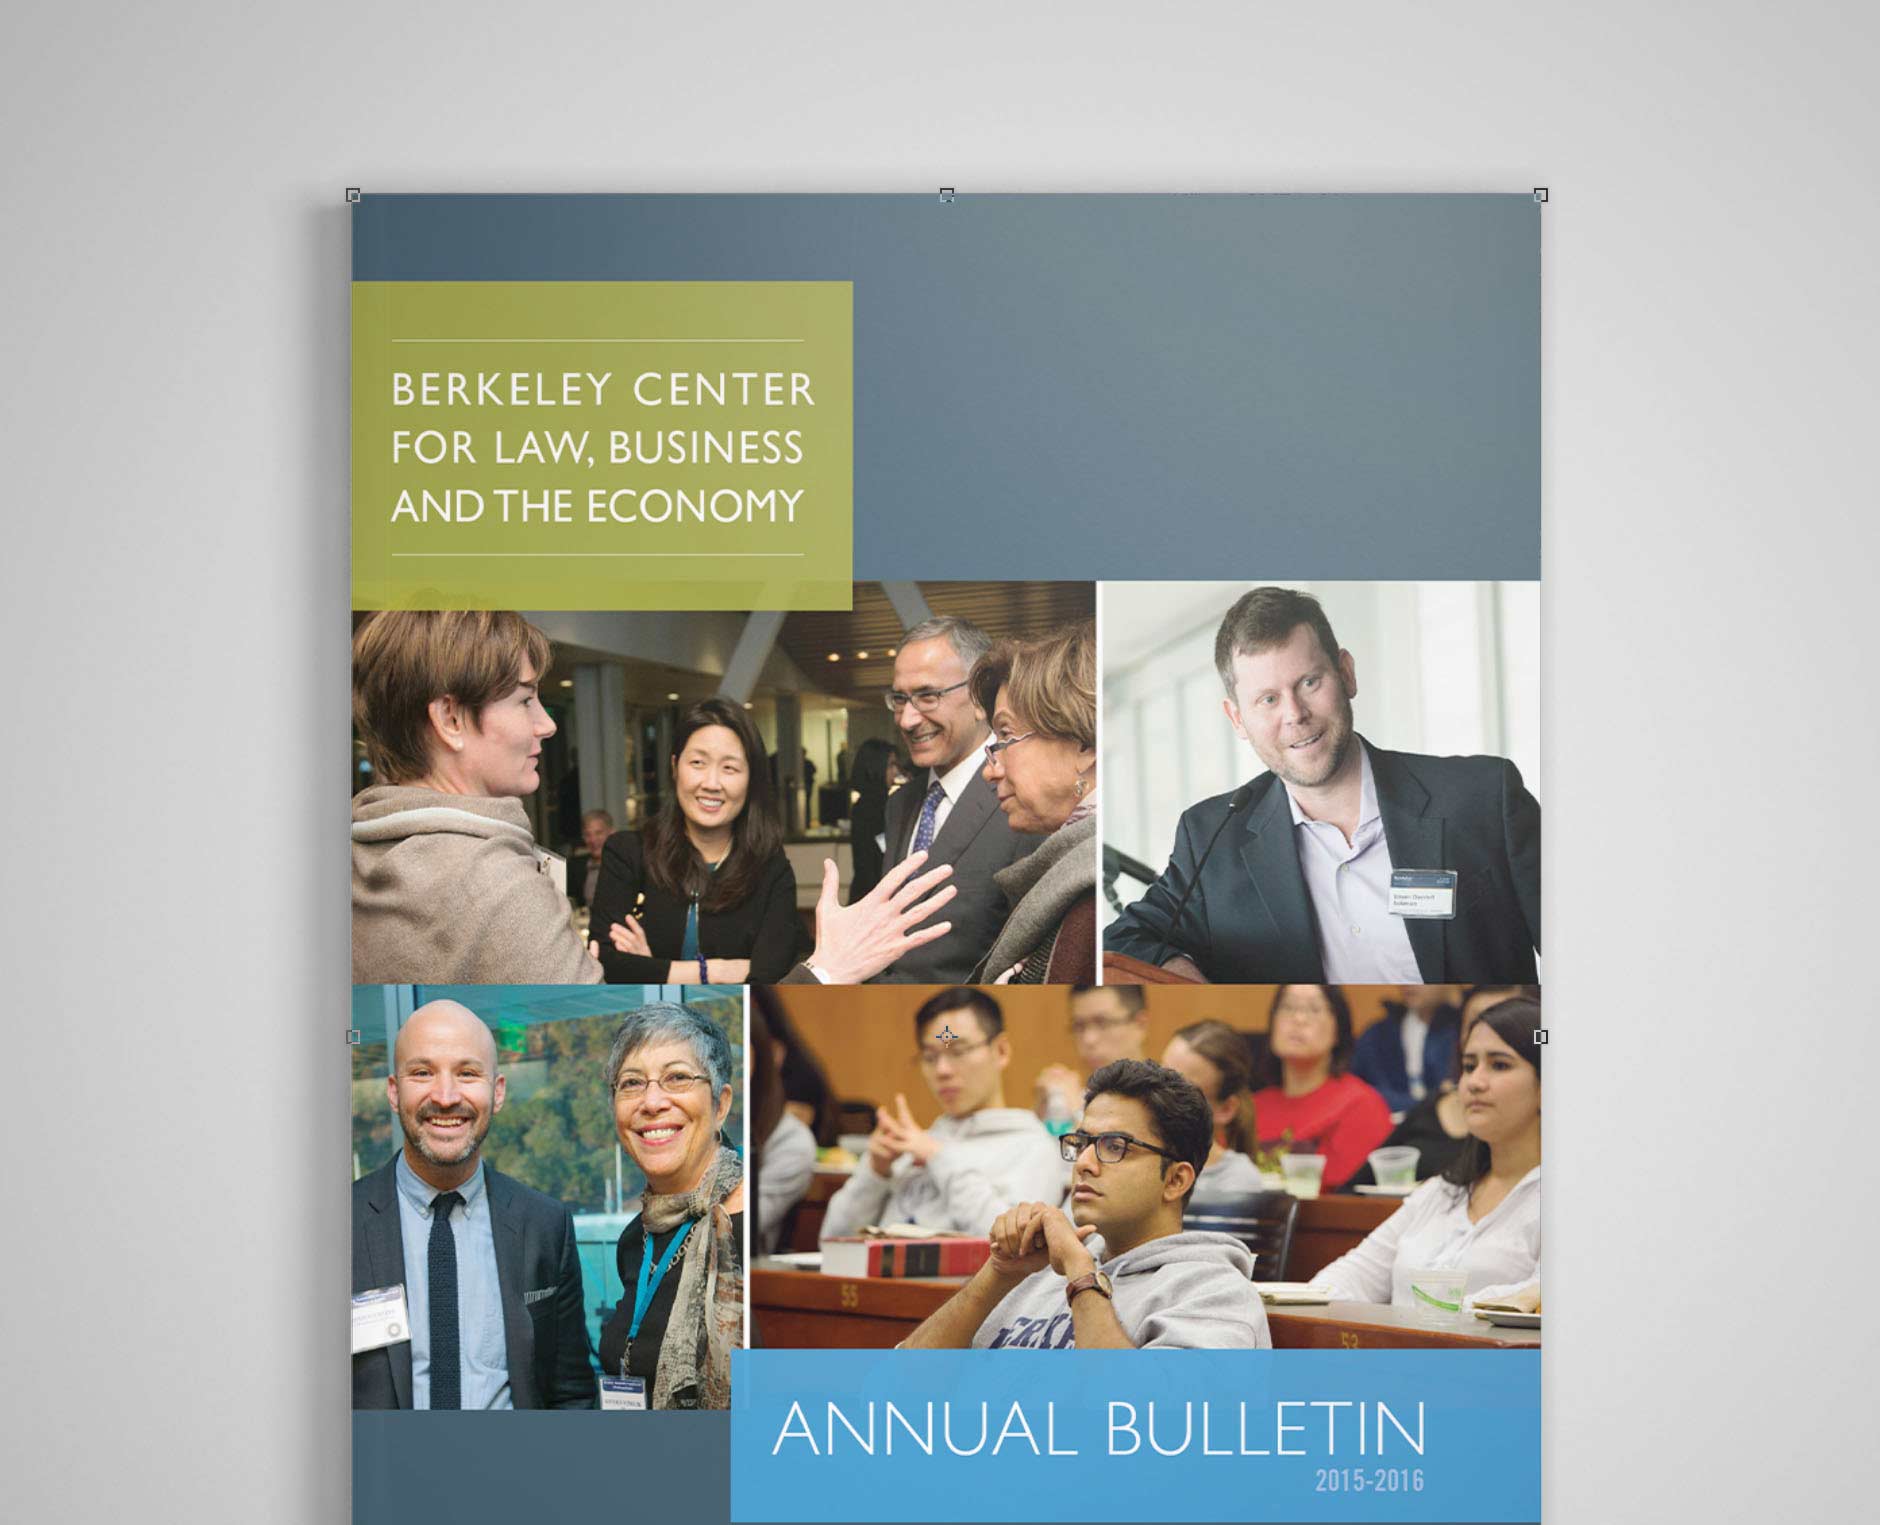 Berkeley Center for Law, Business and the Economy: Annual Bulletin